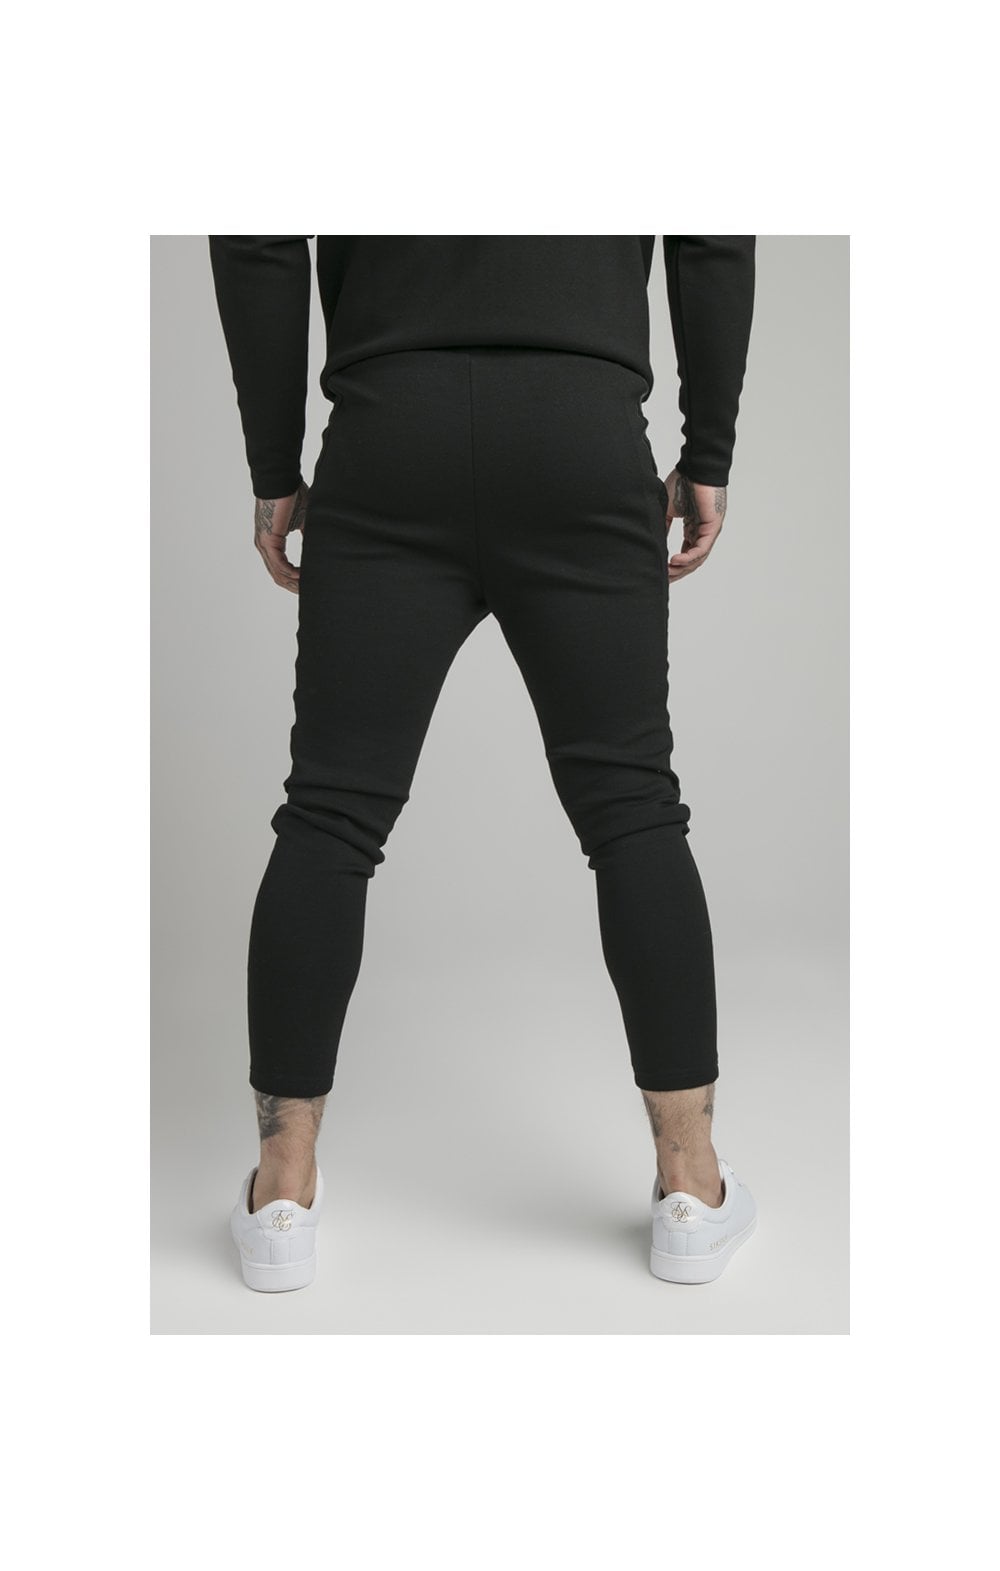 Black Motion Tape Zip Through Hoodie And Jogger Set (8)